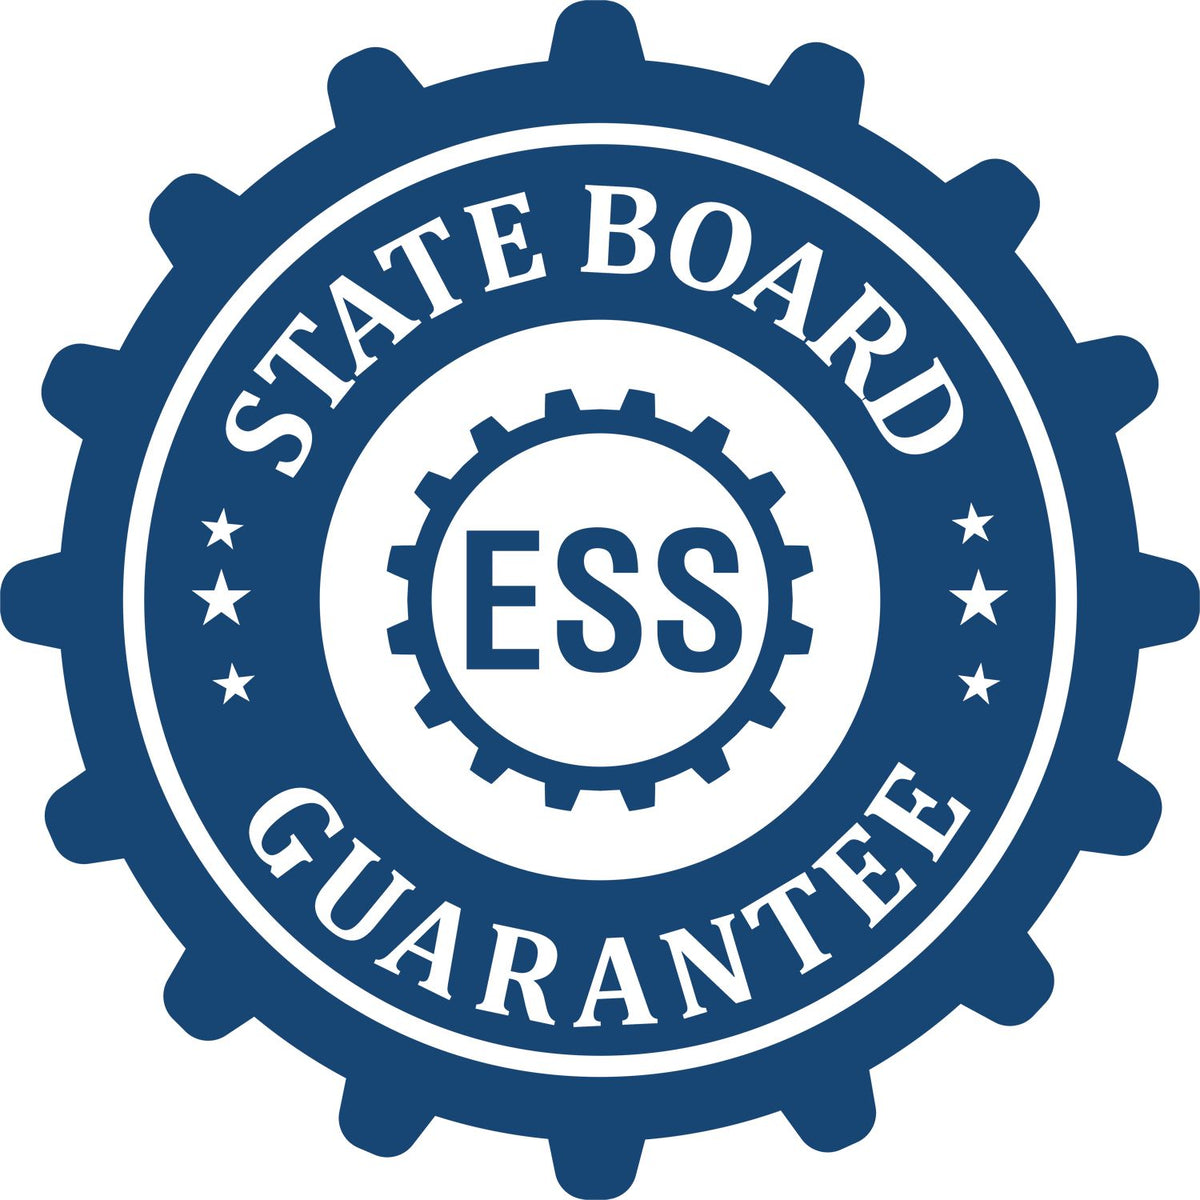 An emblem in a gear shape illustrating a state board guarantee for the Gift Guam Geologist Seal